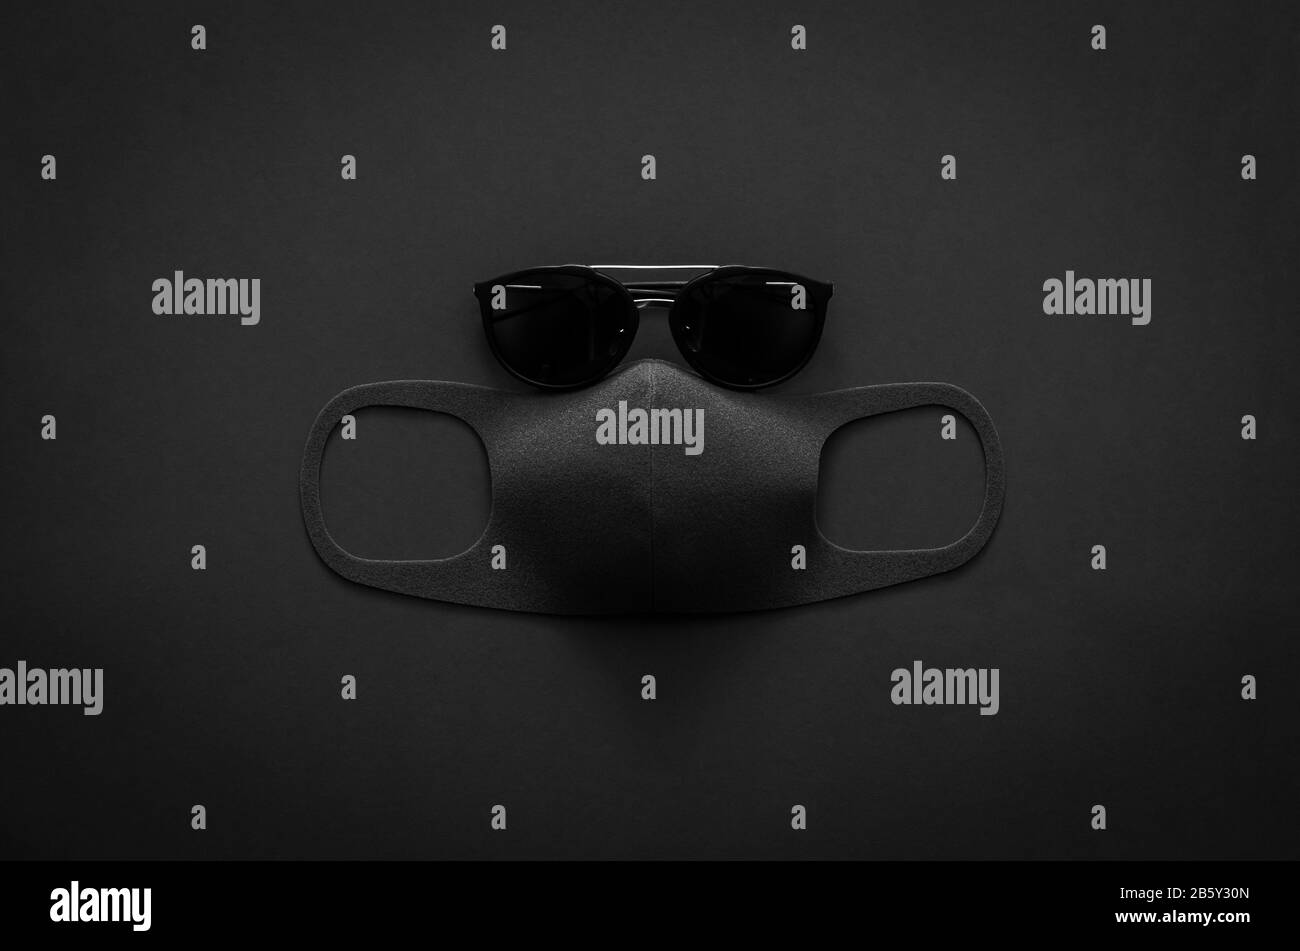 Sunglasses and face mask to protect virus on dark background for minimalist flat lay black concept. Stock Photo